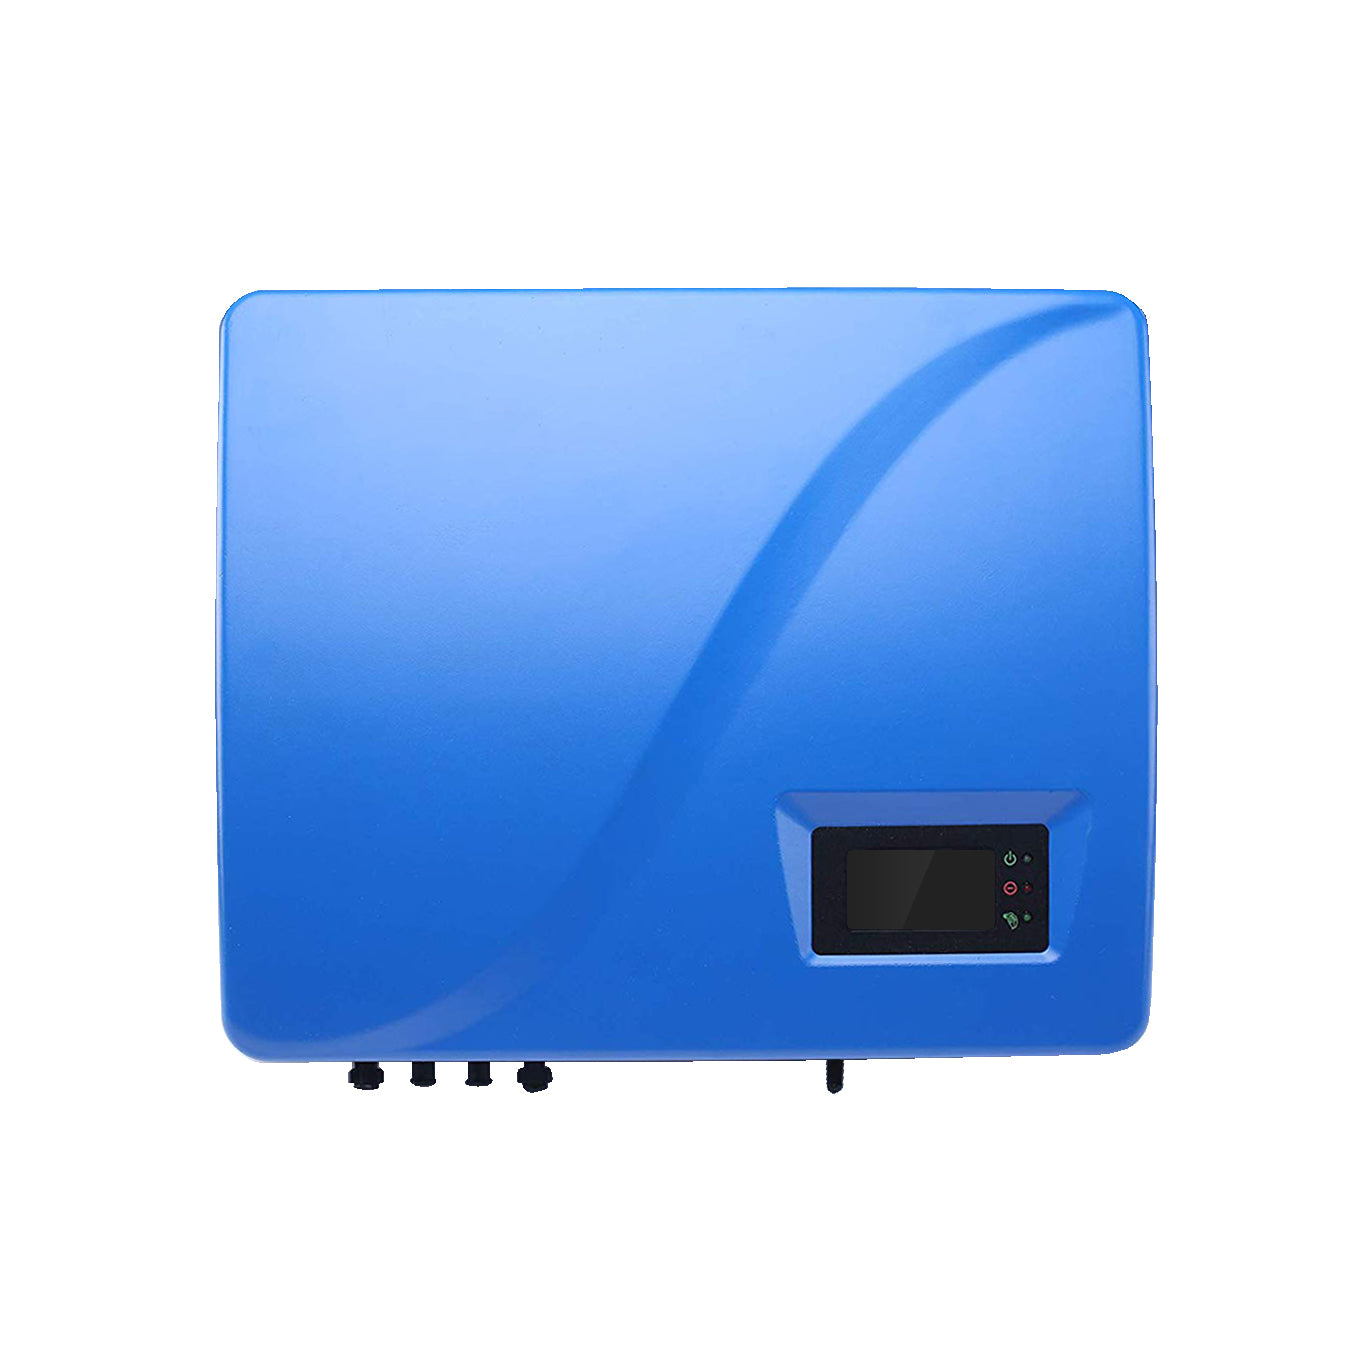 Tumo-Int 3kVA Grid-Tie Solar Inverter with Power Limiter and Wi-Fi Communication